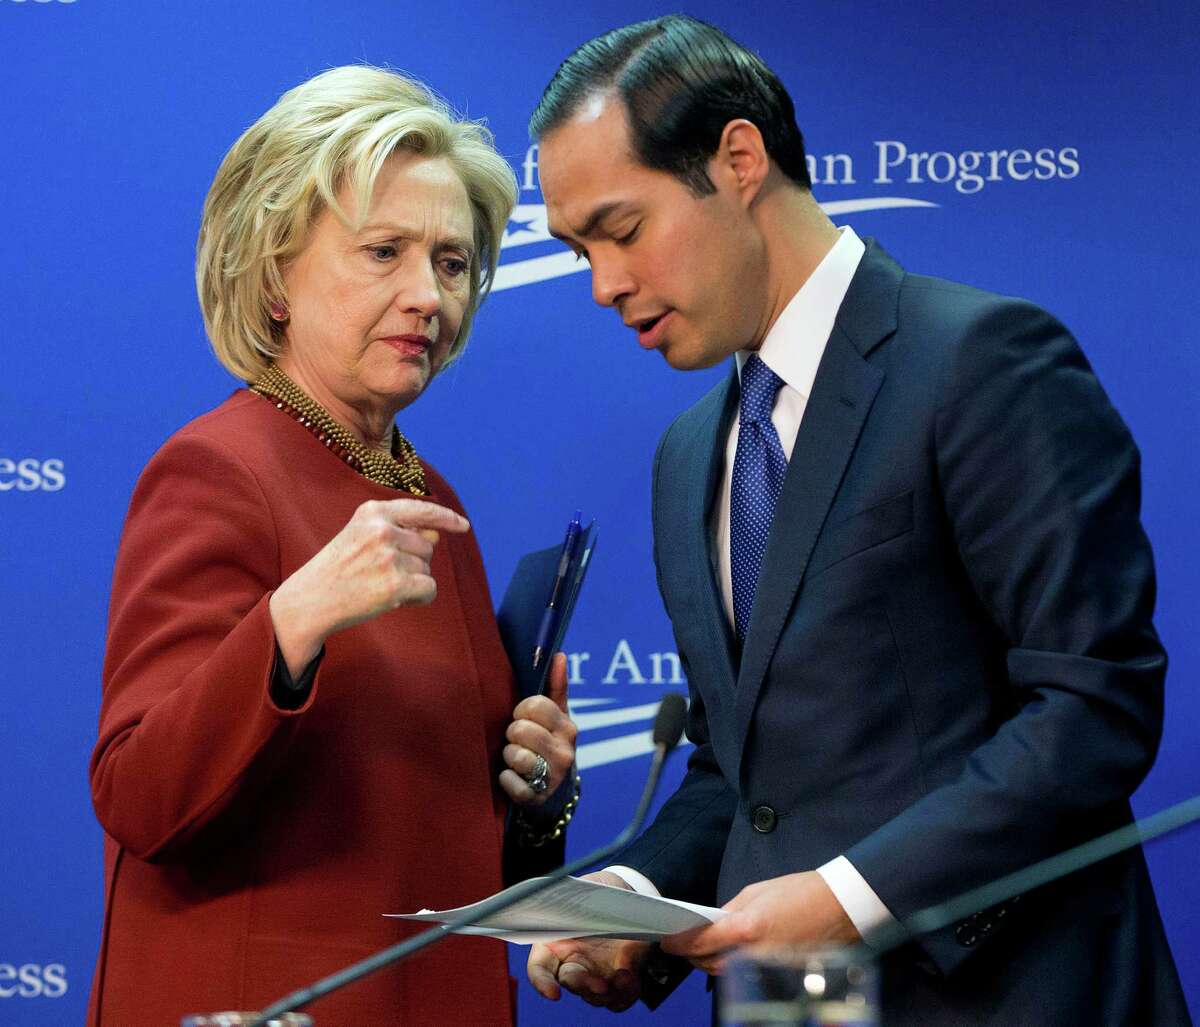 Former Secretary of State Hillary Rodham Clinton﻿ talks with Housing and Urban Development Secretary ﻿Julián Castro﻿ after both spoke at an event﻿ Monday.